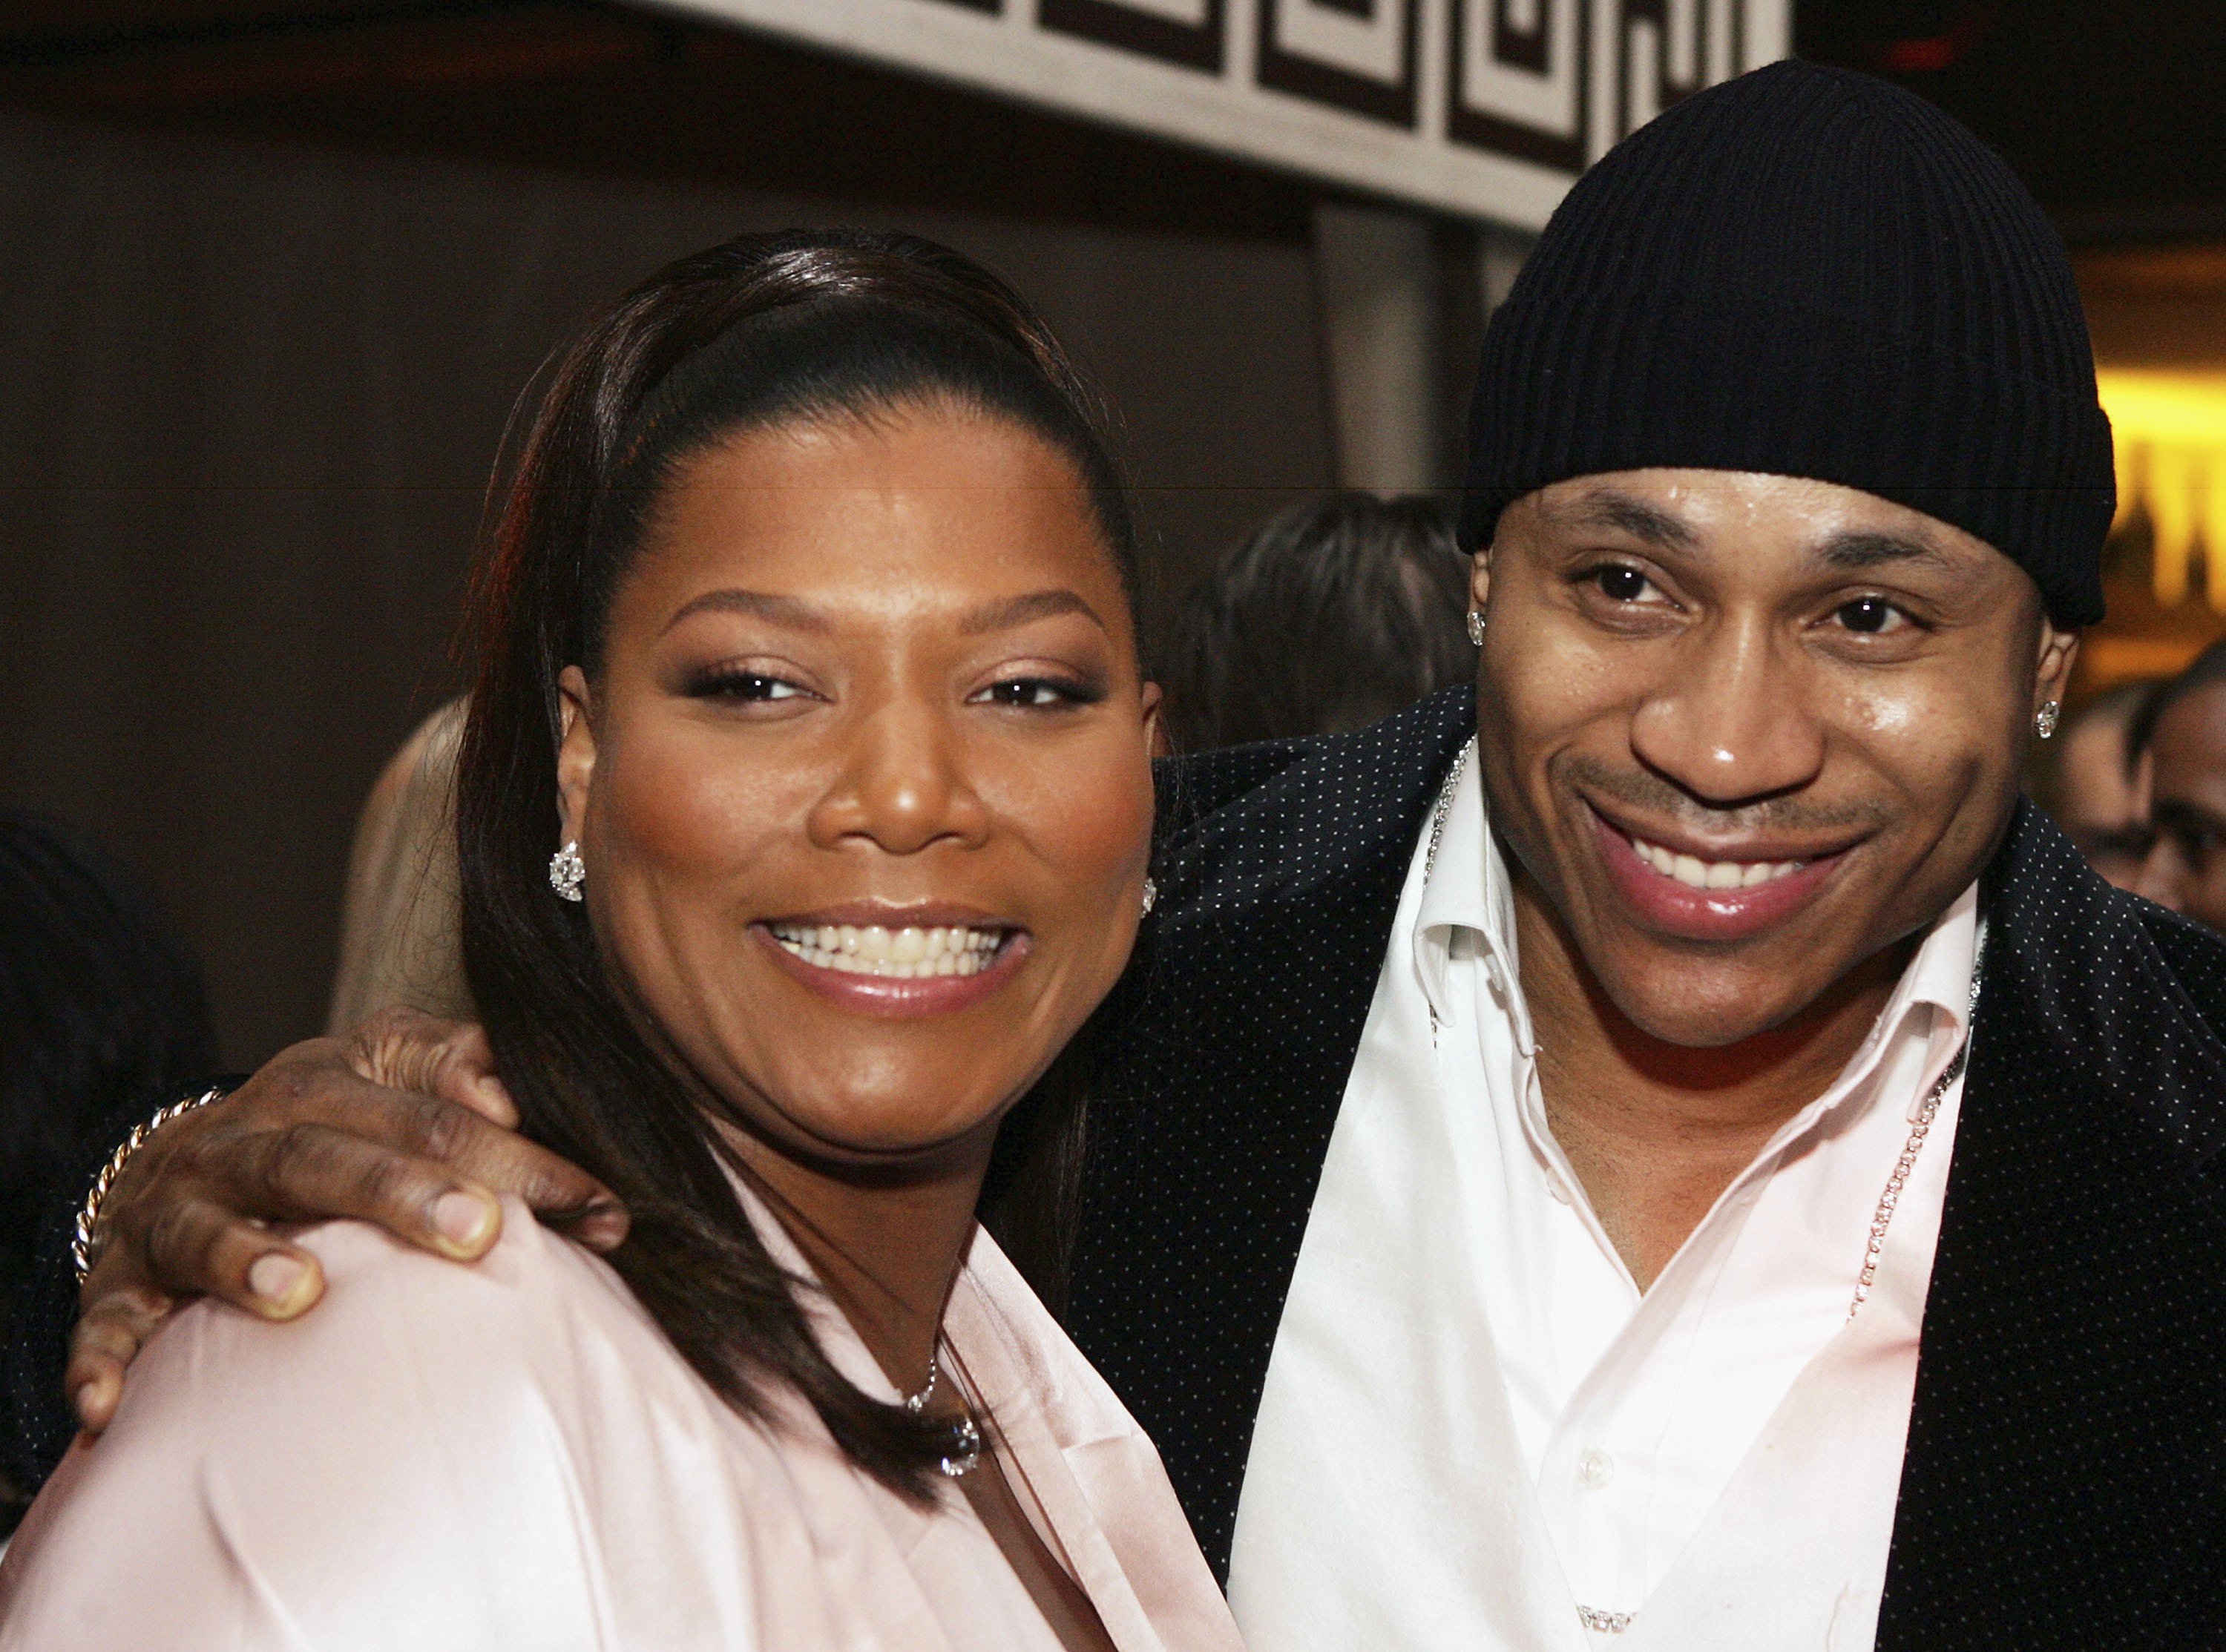 'The Equalizer' star Queen Latifah (L) and 'NCIS: Los Angeles' star LL Cool J pose at the afterparty for the premiere of Paramounts' "Last Holiday" at the Cabana Room on January 12, 2006